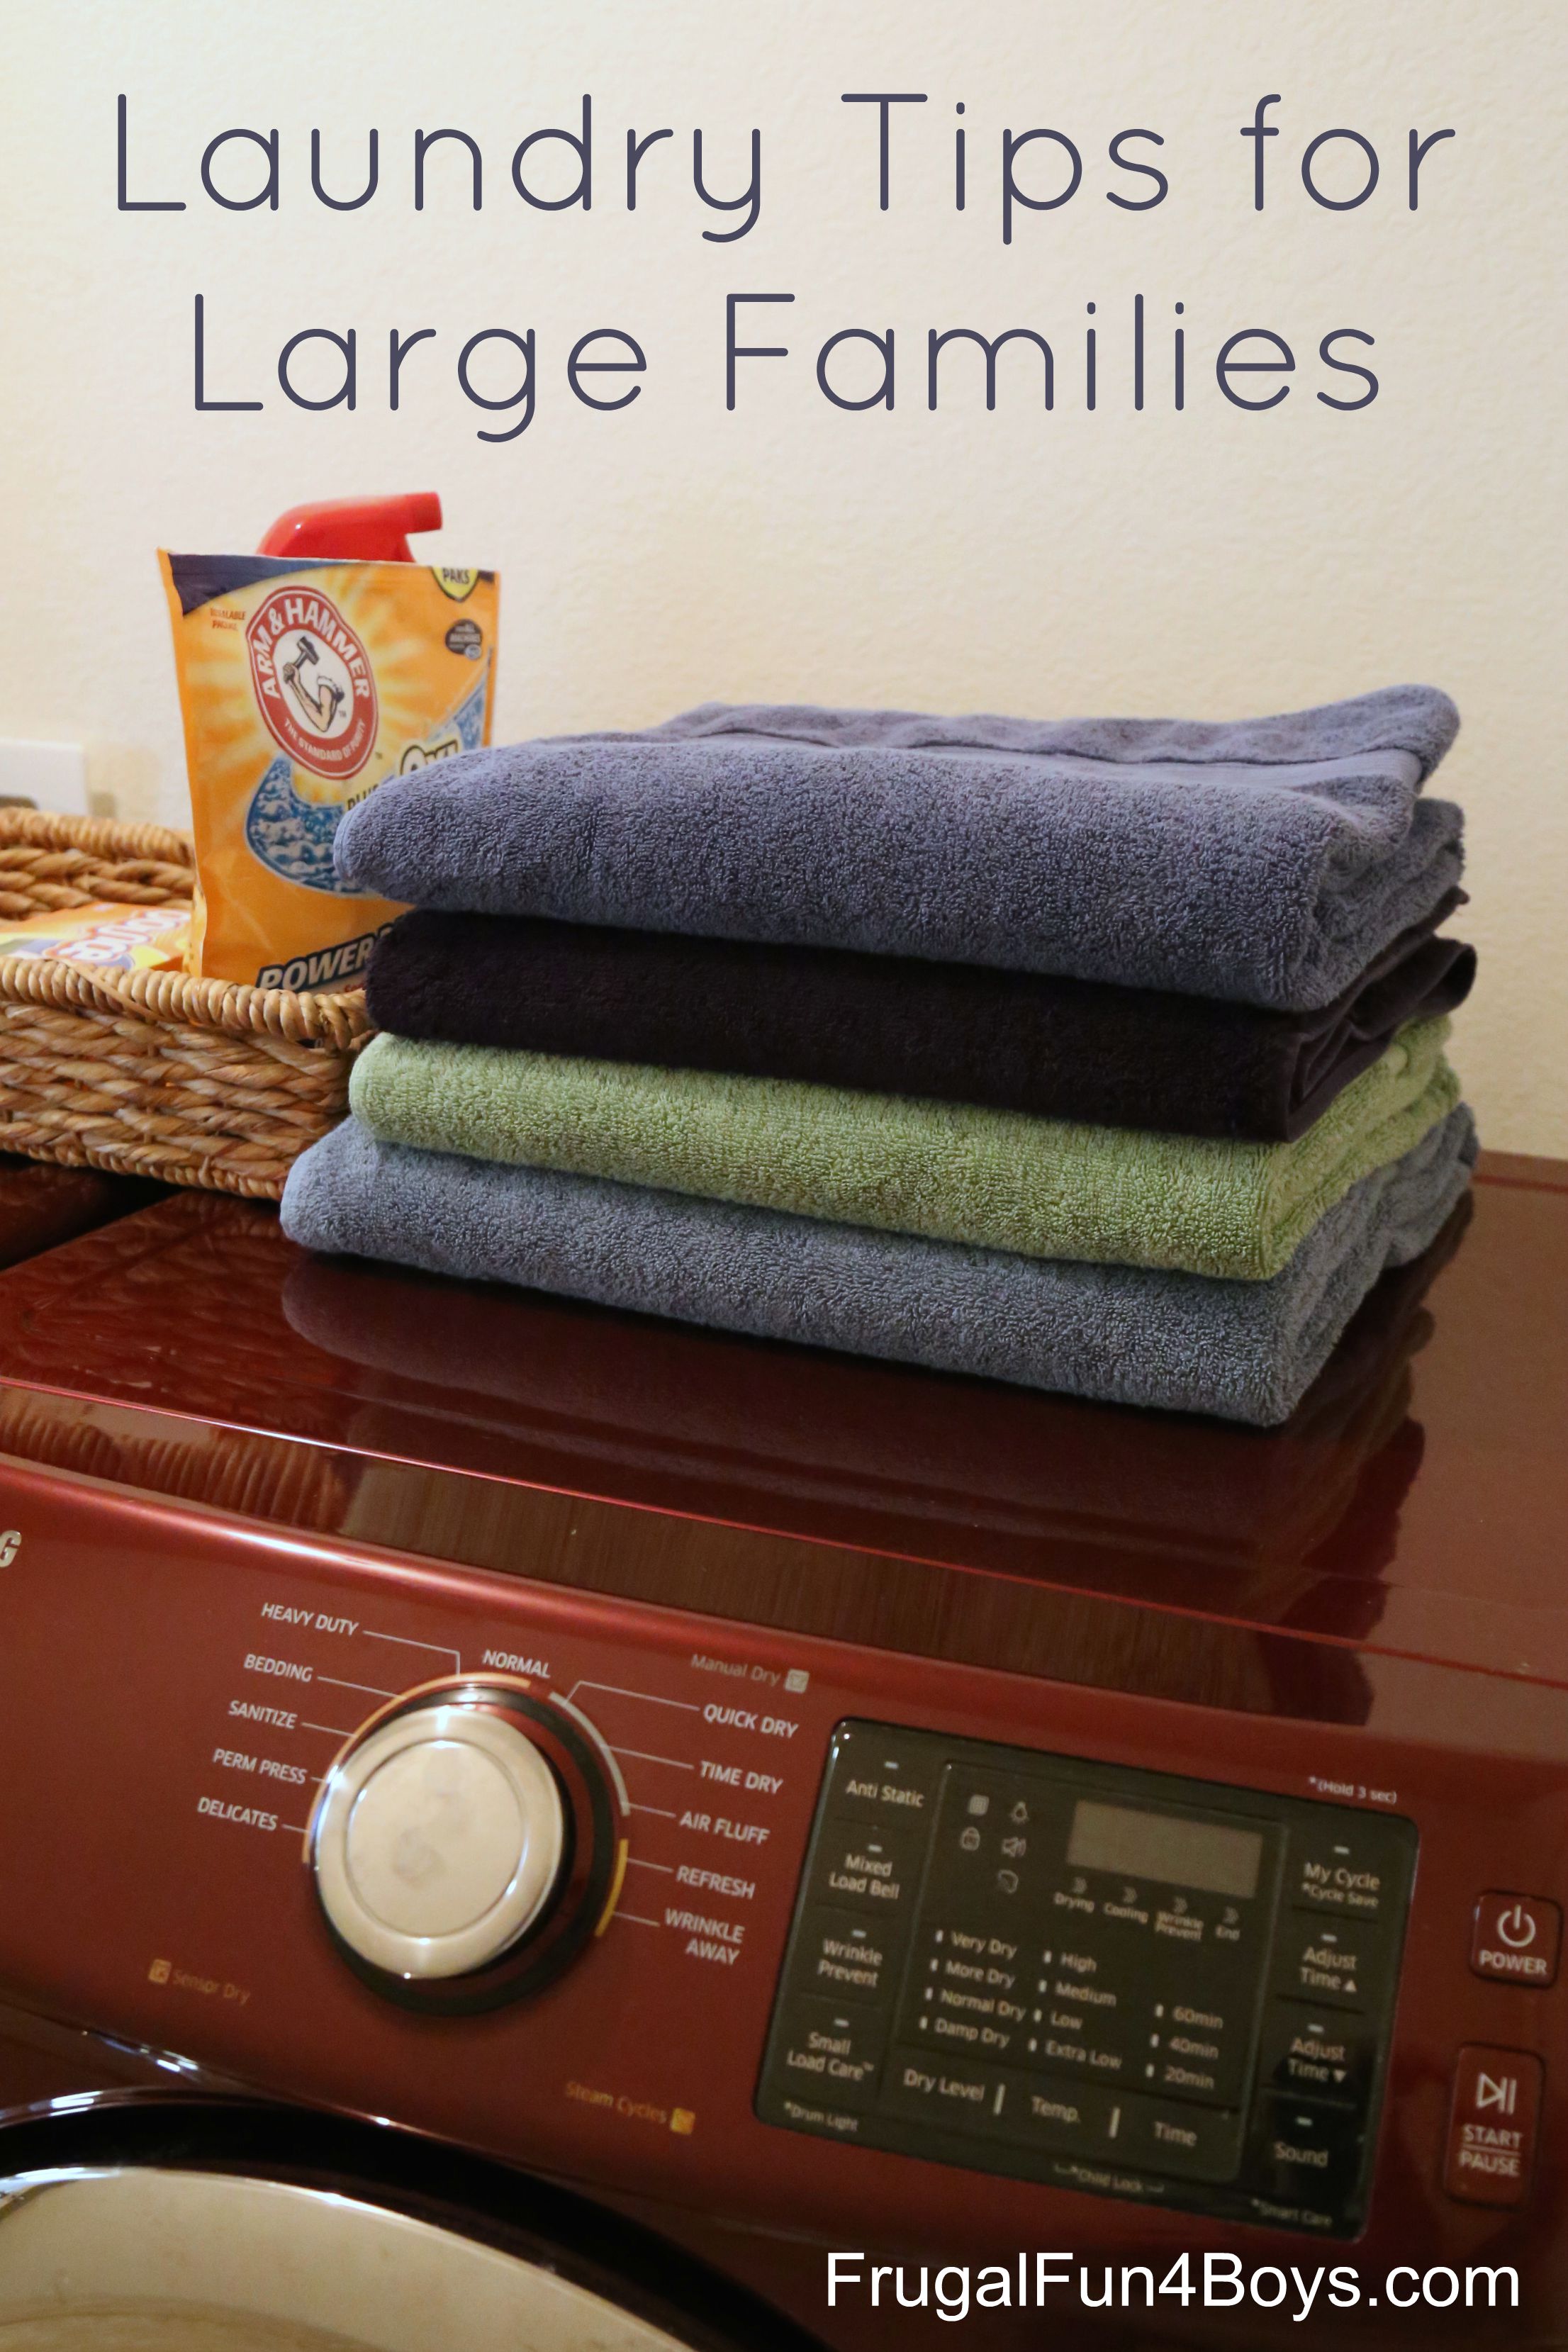 Laundry Tips for Large Families